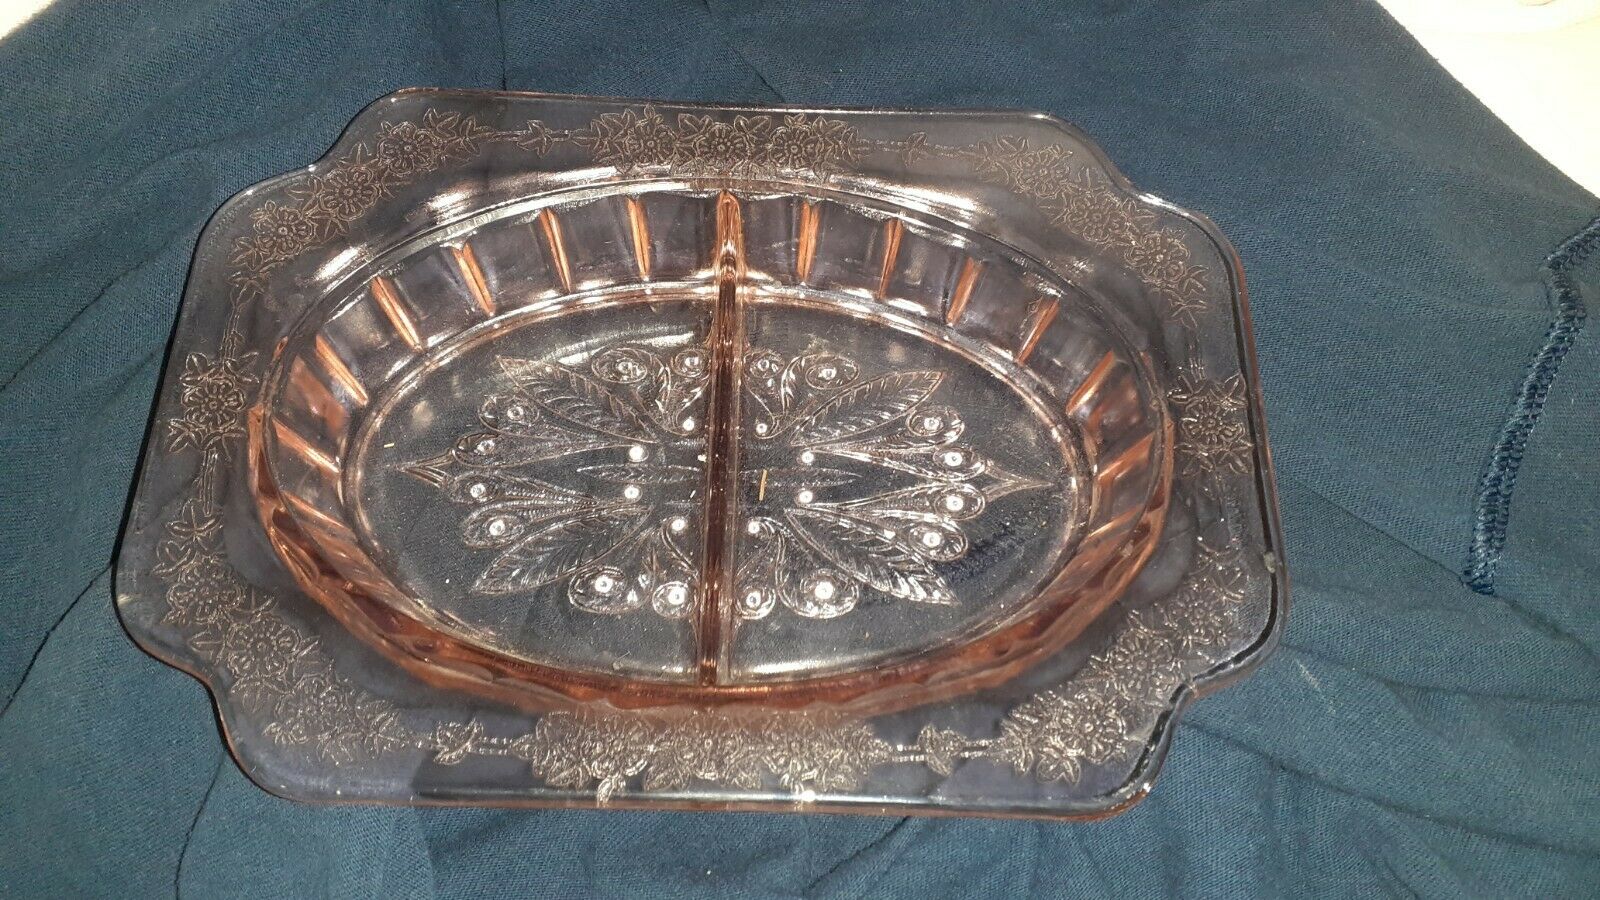 Vinyage Jeanette Adam Pinks Depression Glass Divided Relish Tray *mint*